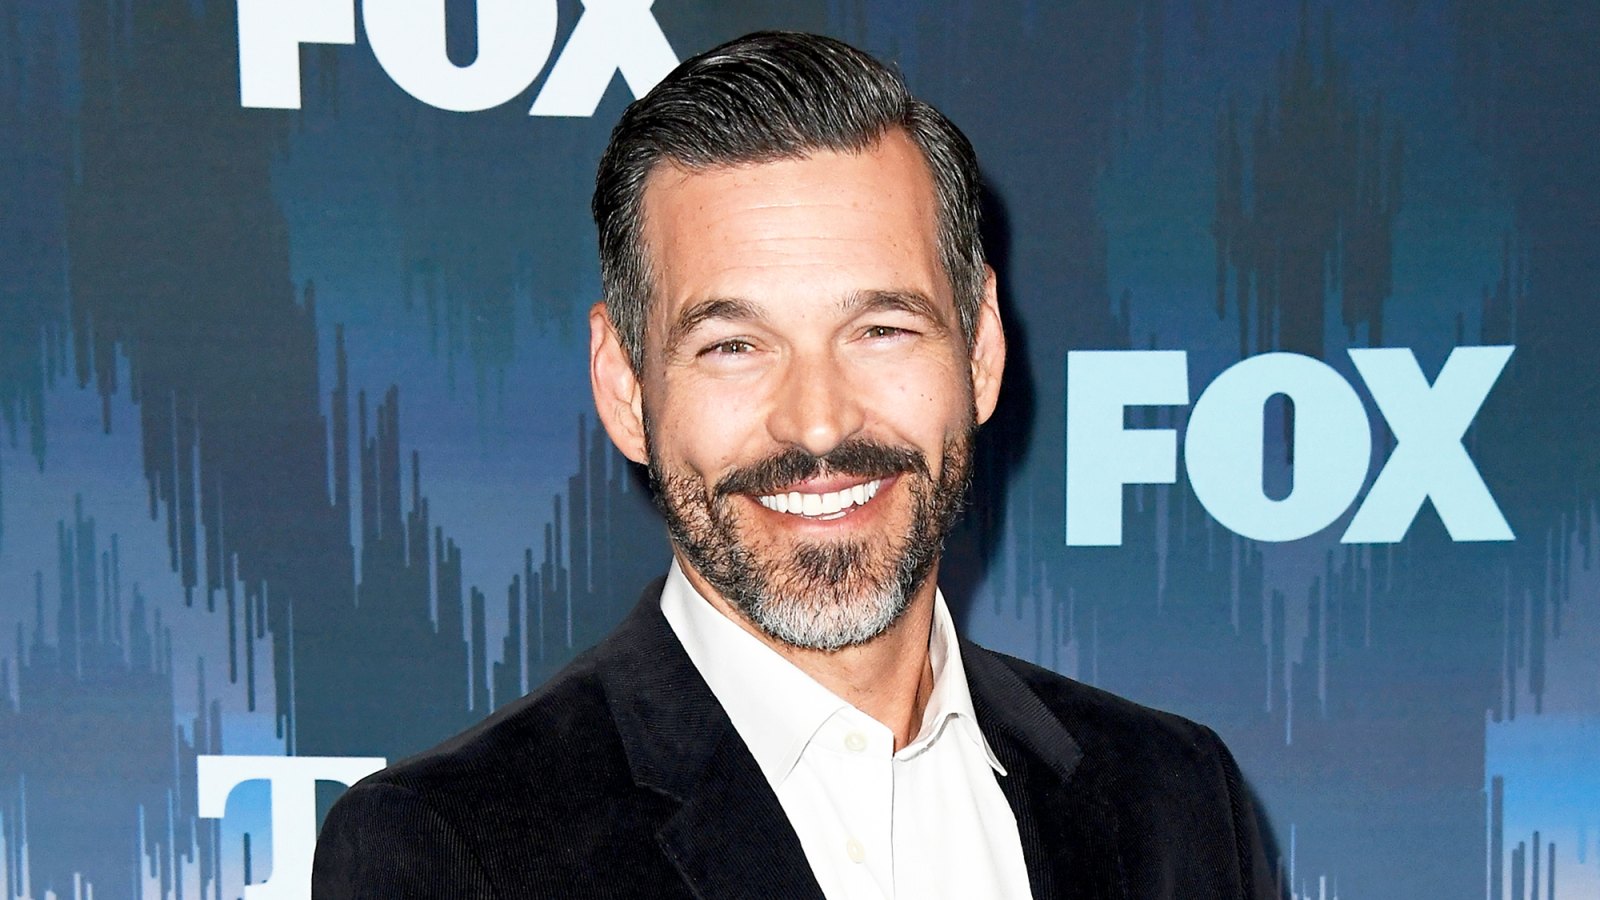 Eddie Cibrian attends the FOX All-Star Party during the 2017 Winter TCA Tour at Langham Hotel in Pasadena, California.